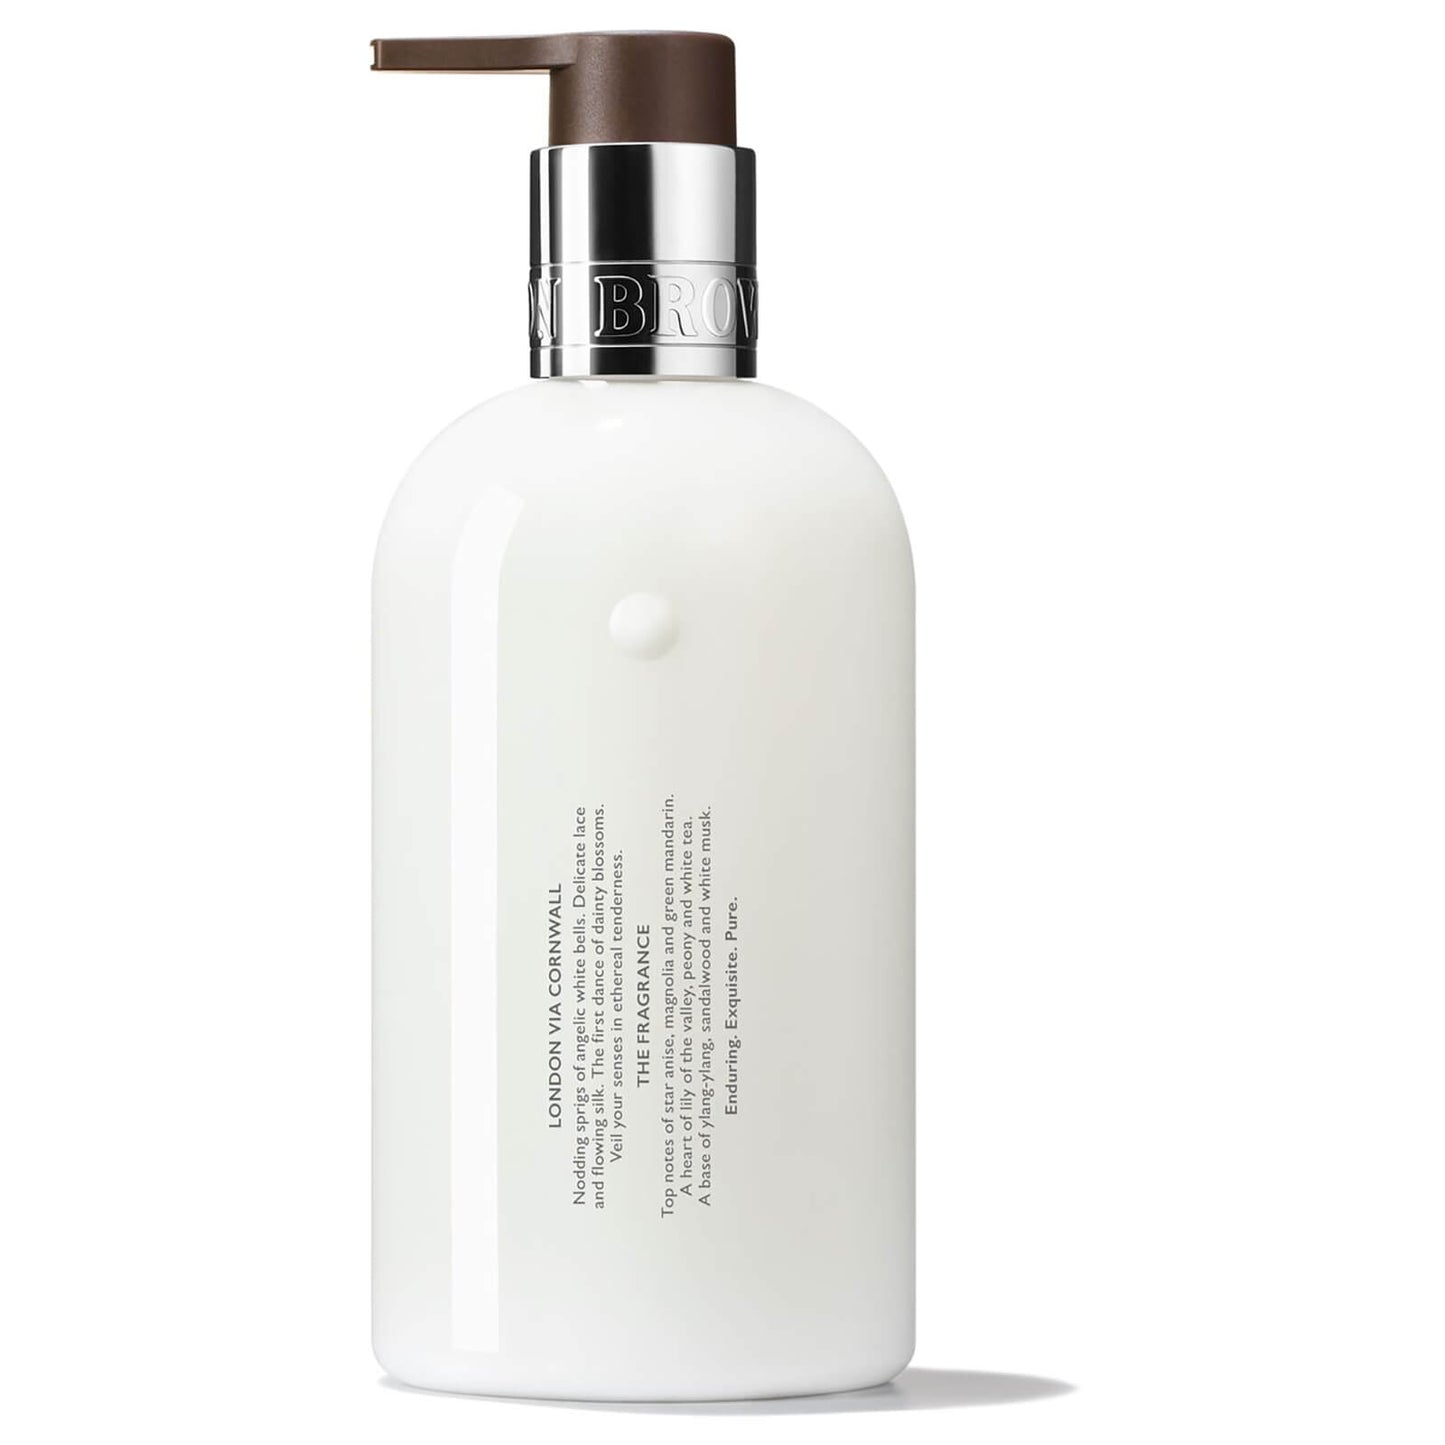 Molton Brown Dewy Lily of the Valley & Star Anise Body Lotion